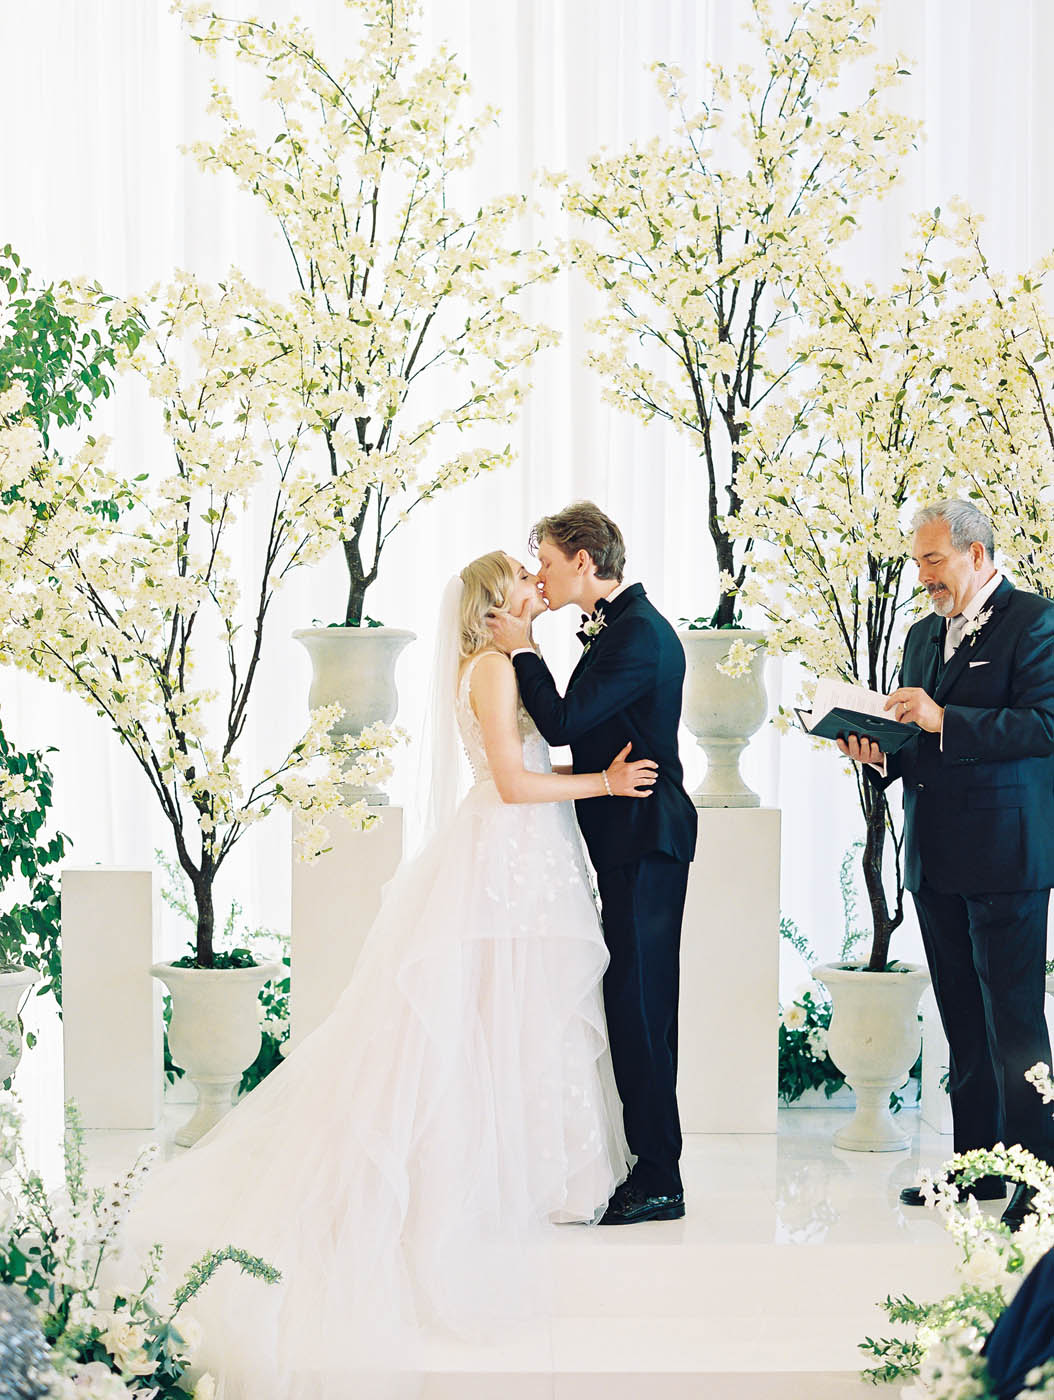 the bride and groom kiss at their ceremony with indoor trees